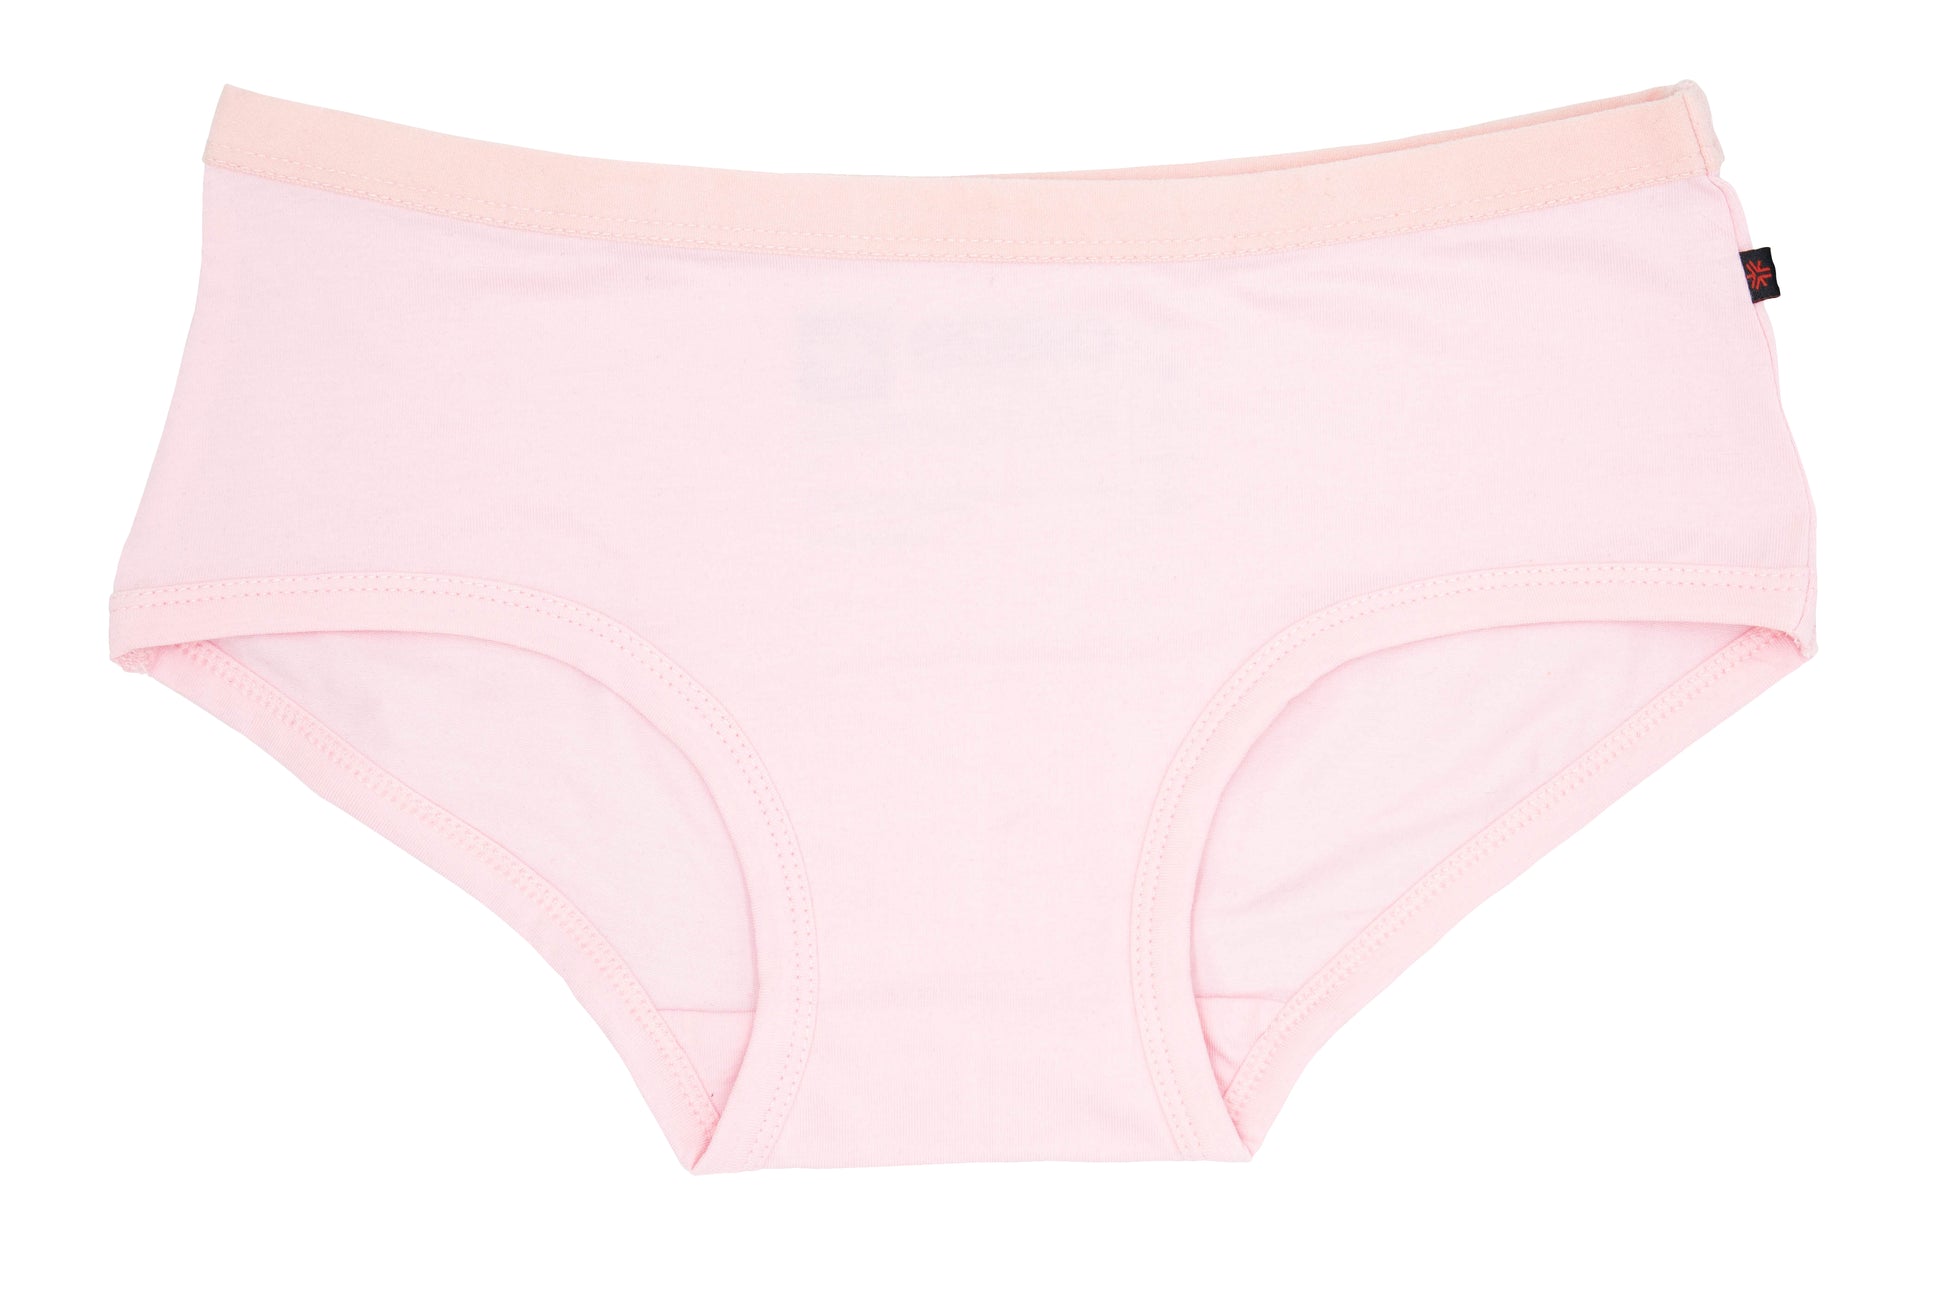 The Difference Between Women's Underwear Made with Cotton